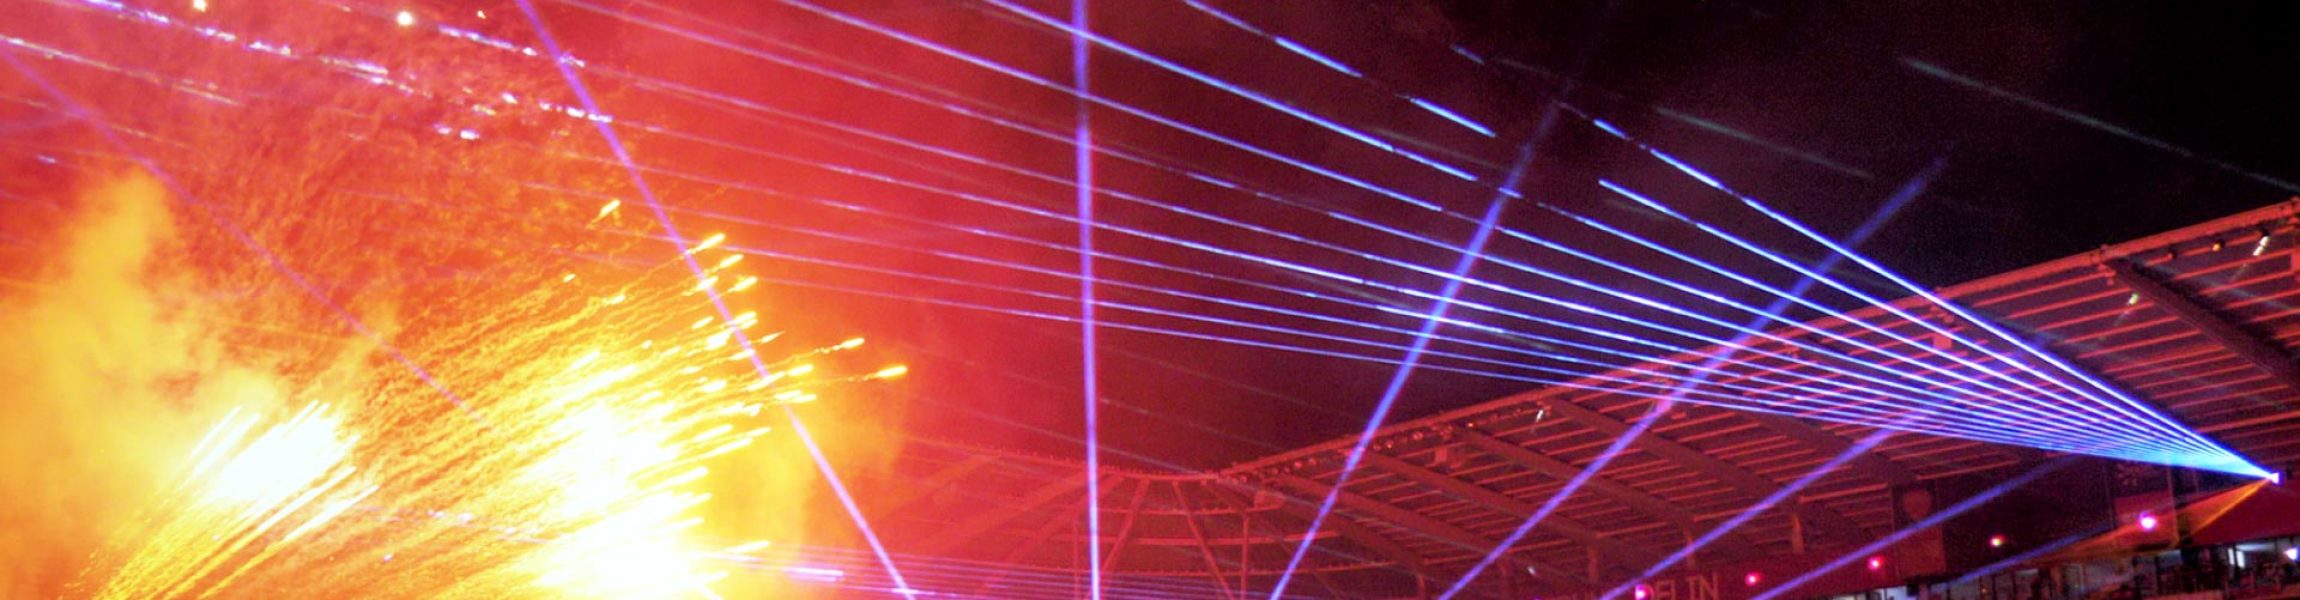 lasermov-spectacle-laser-feux-artifice-dfco